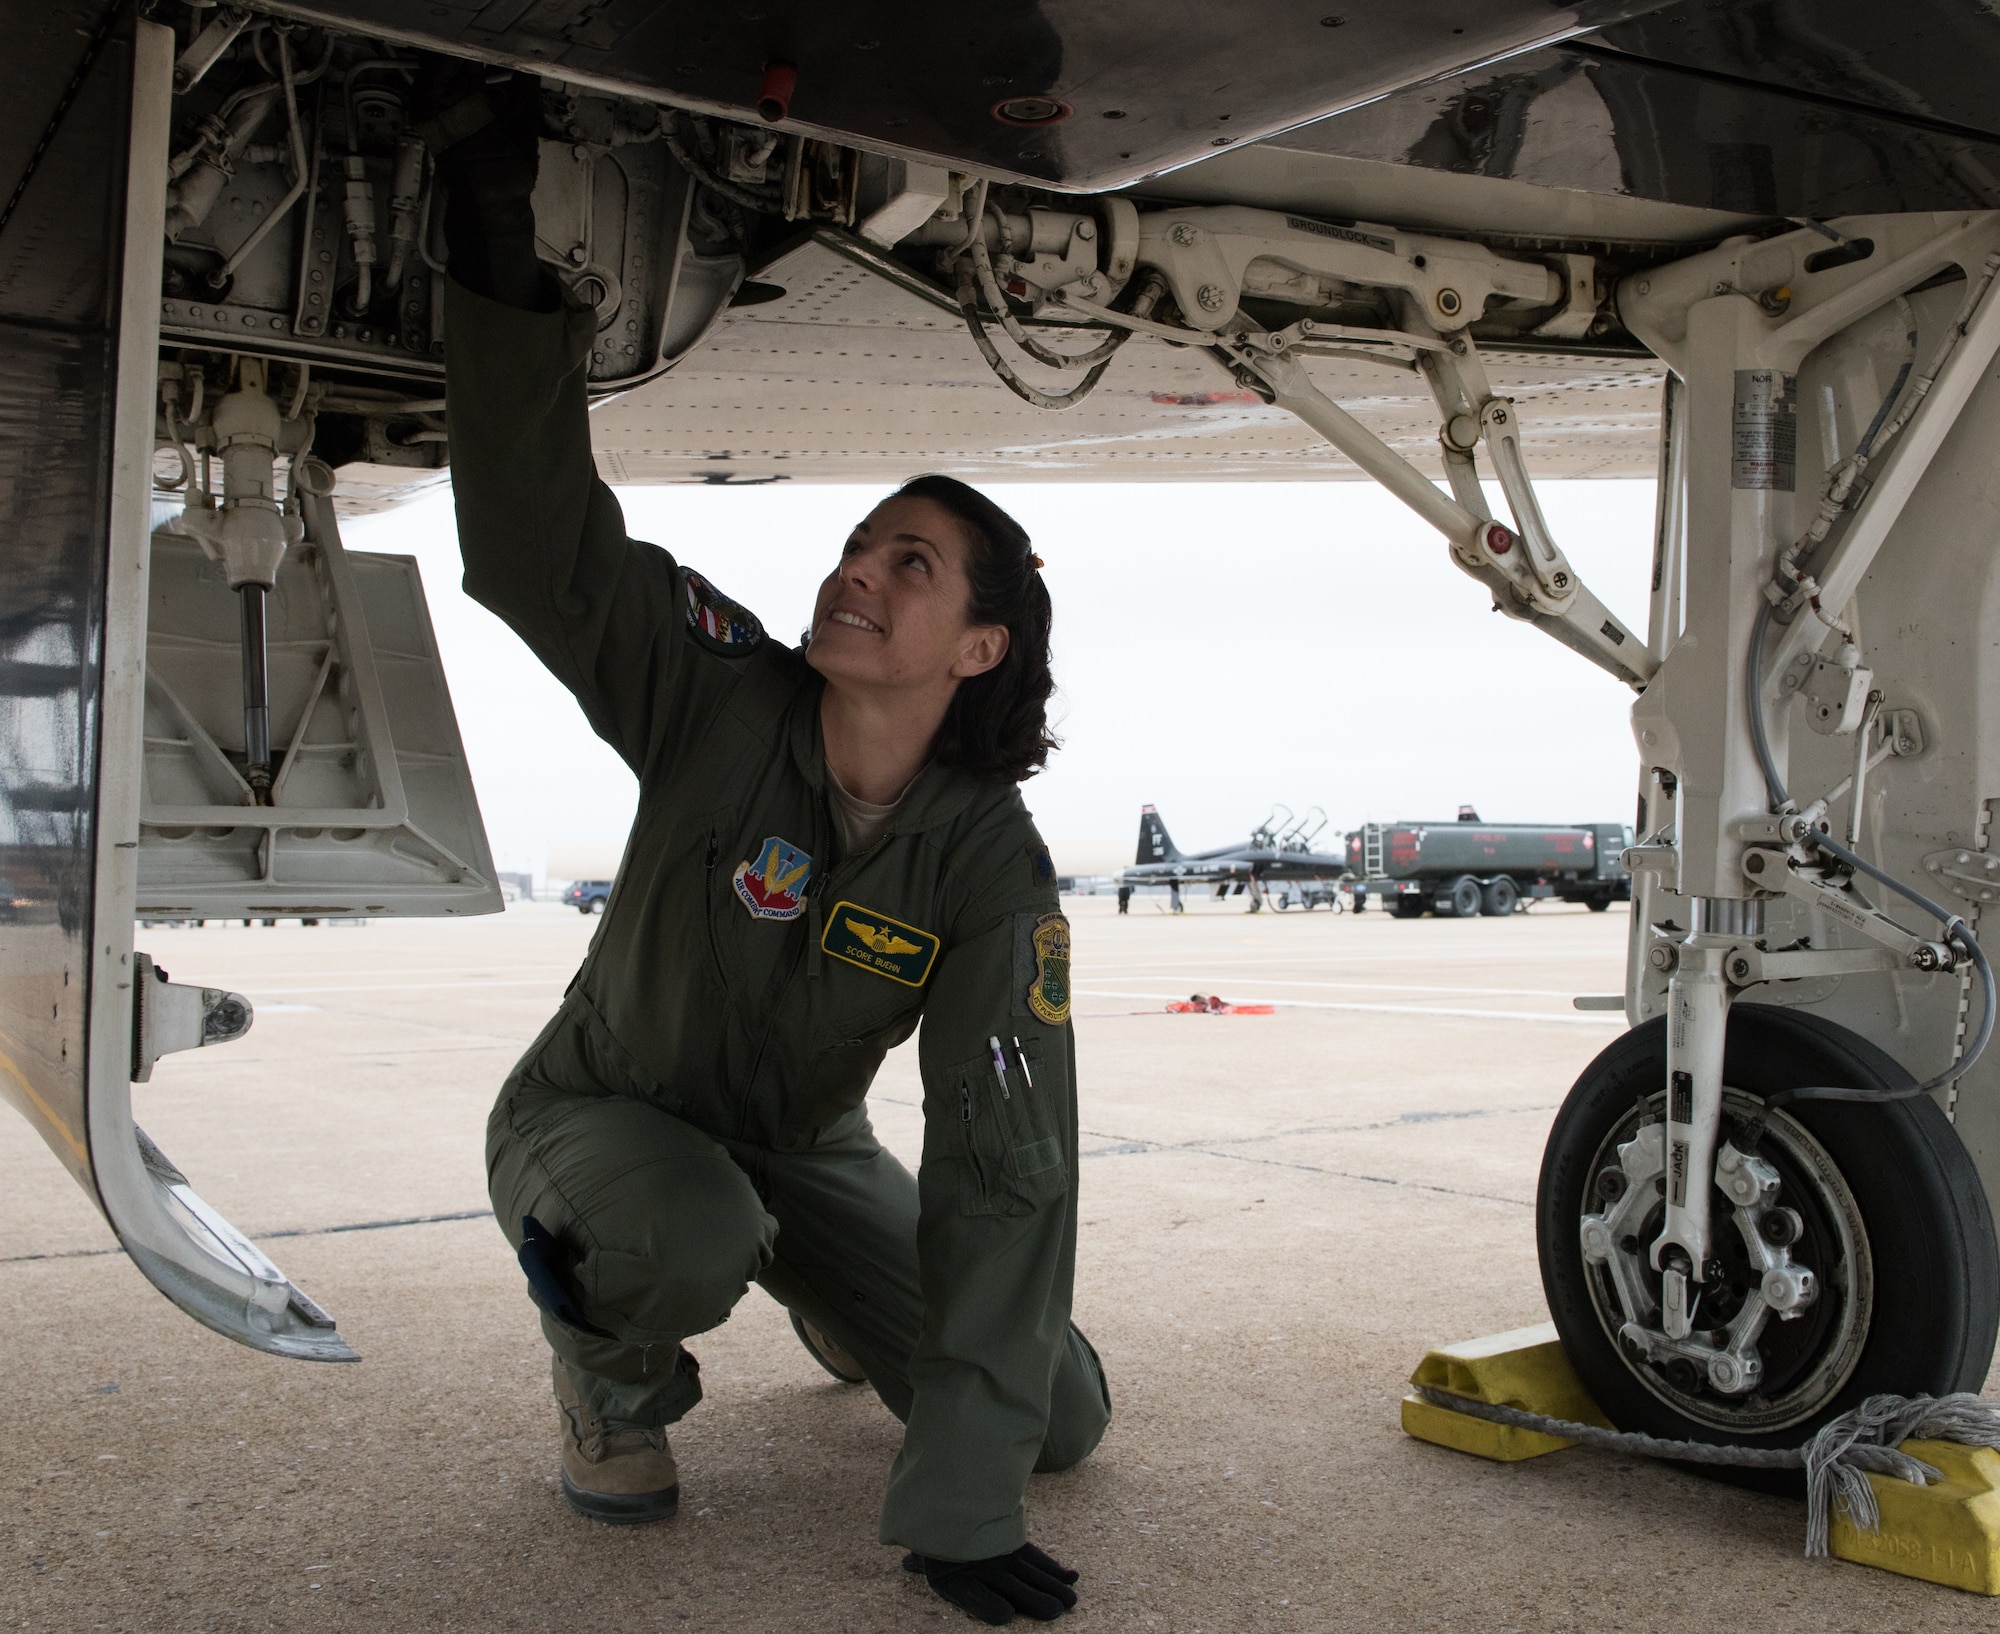 U.S Air Force Lt. Col. Cheryl Buehn, 71st Fighter Training Squadron T-38A Talon instructor pilot, performs preflight inspections on a T-38A Talon at Joint Base Langley-Eustis, Virginia, March 27, 2018